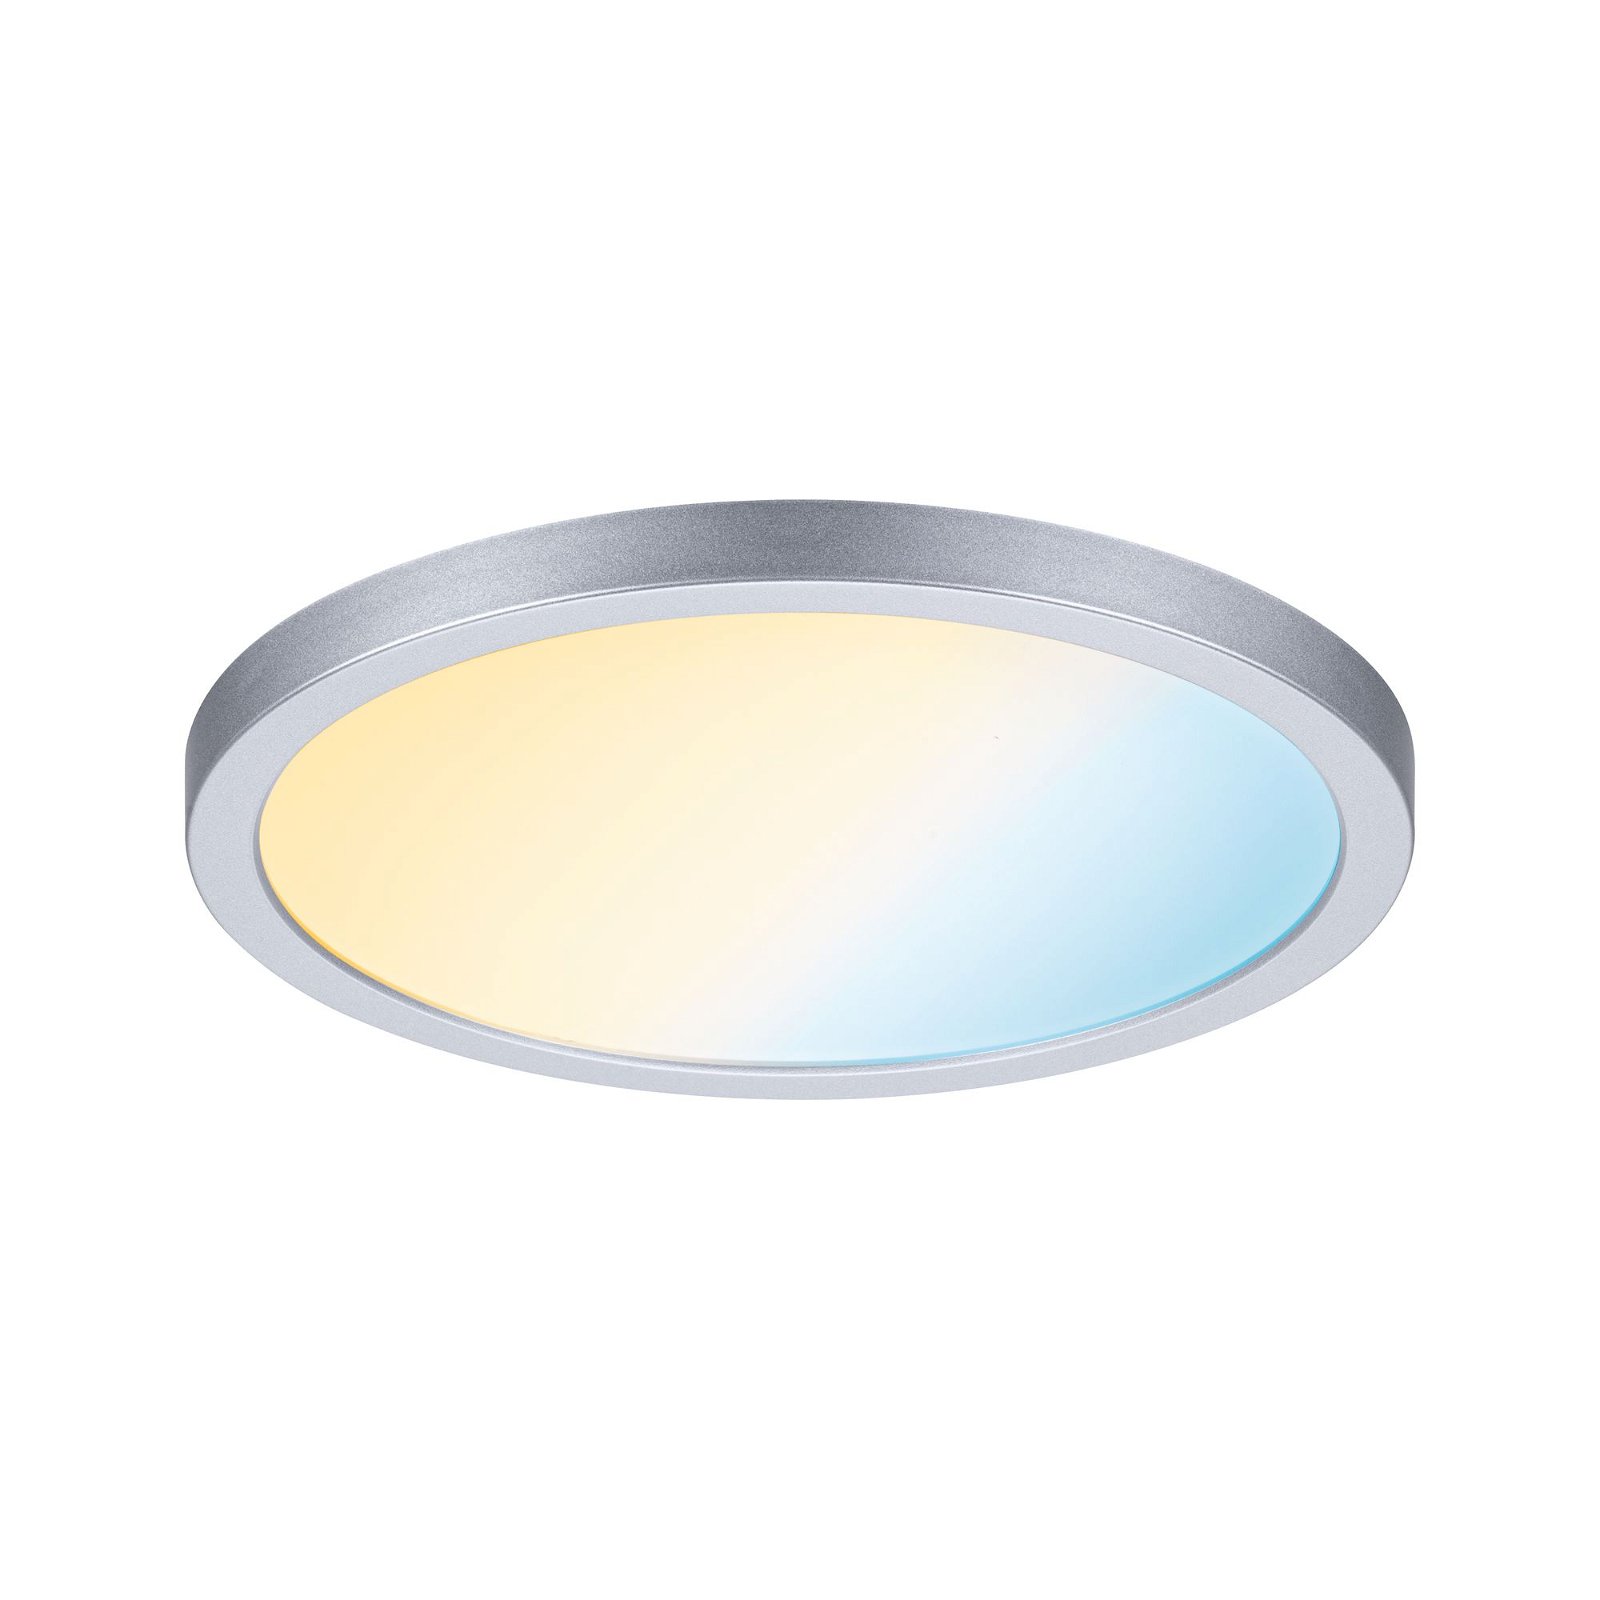 VariFit LED Recessed panel Smart Home Zigbee 3.0 Areo IP44 round 175mm 13W 1200lm Tunable White Chrome matt dimmable